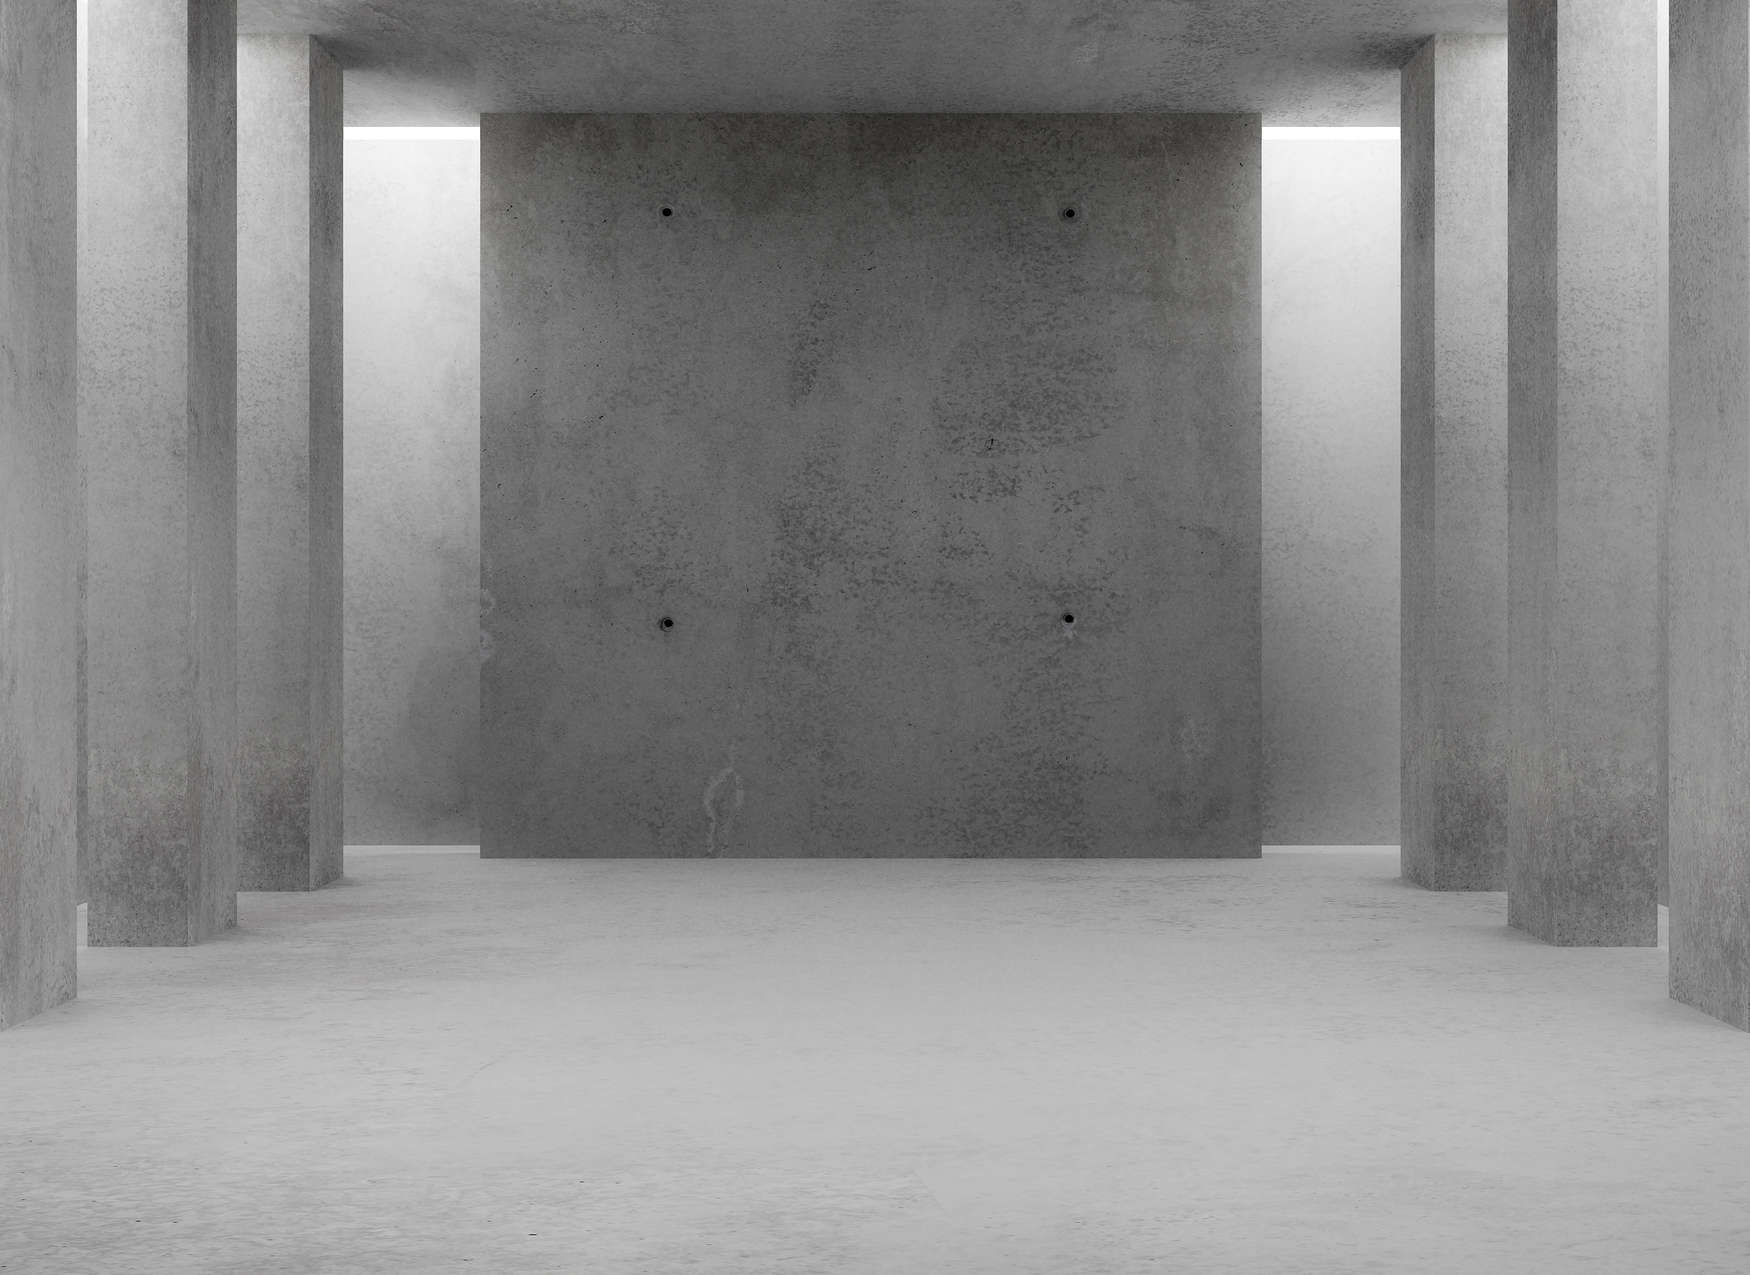             Photo wallpaper with a 3D concrete room - Grey
        